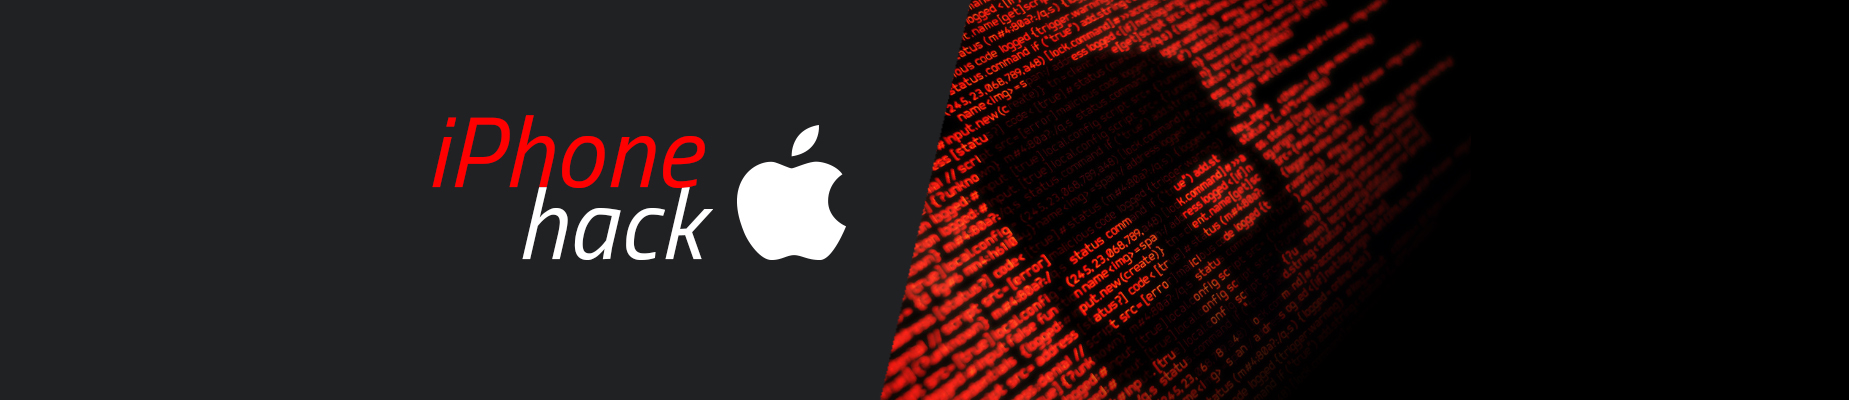 iPhone hack: Google finds evidence of iOS hacking attack